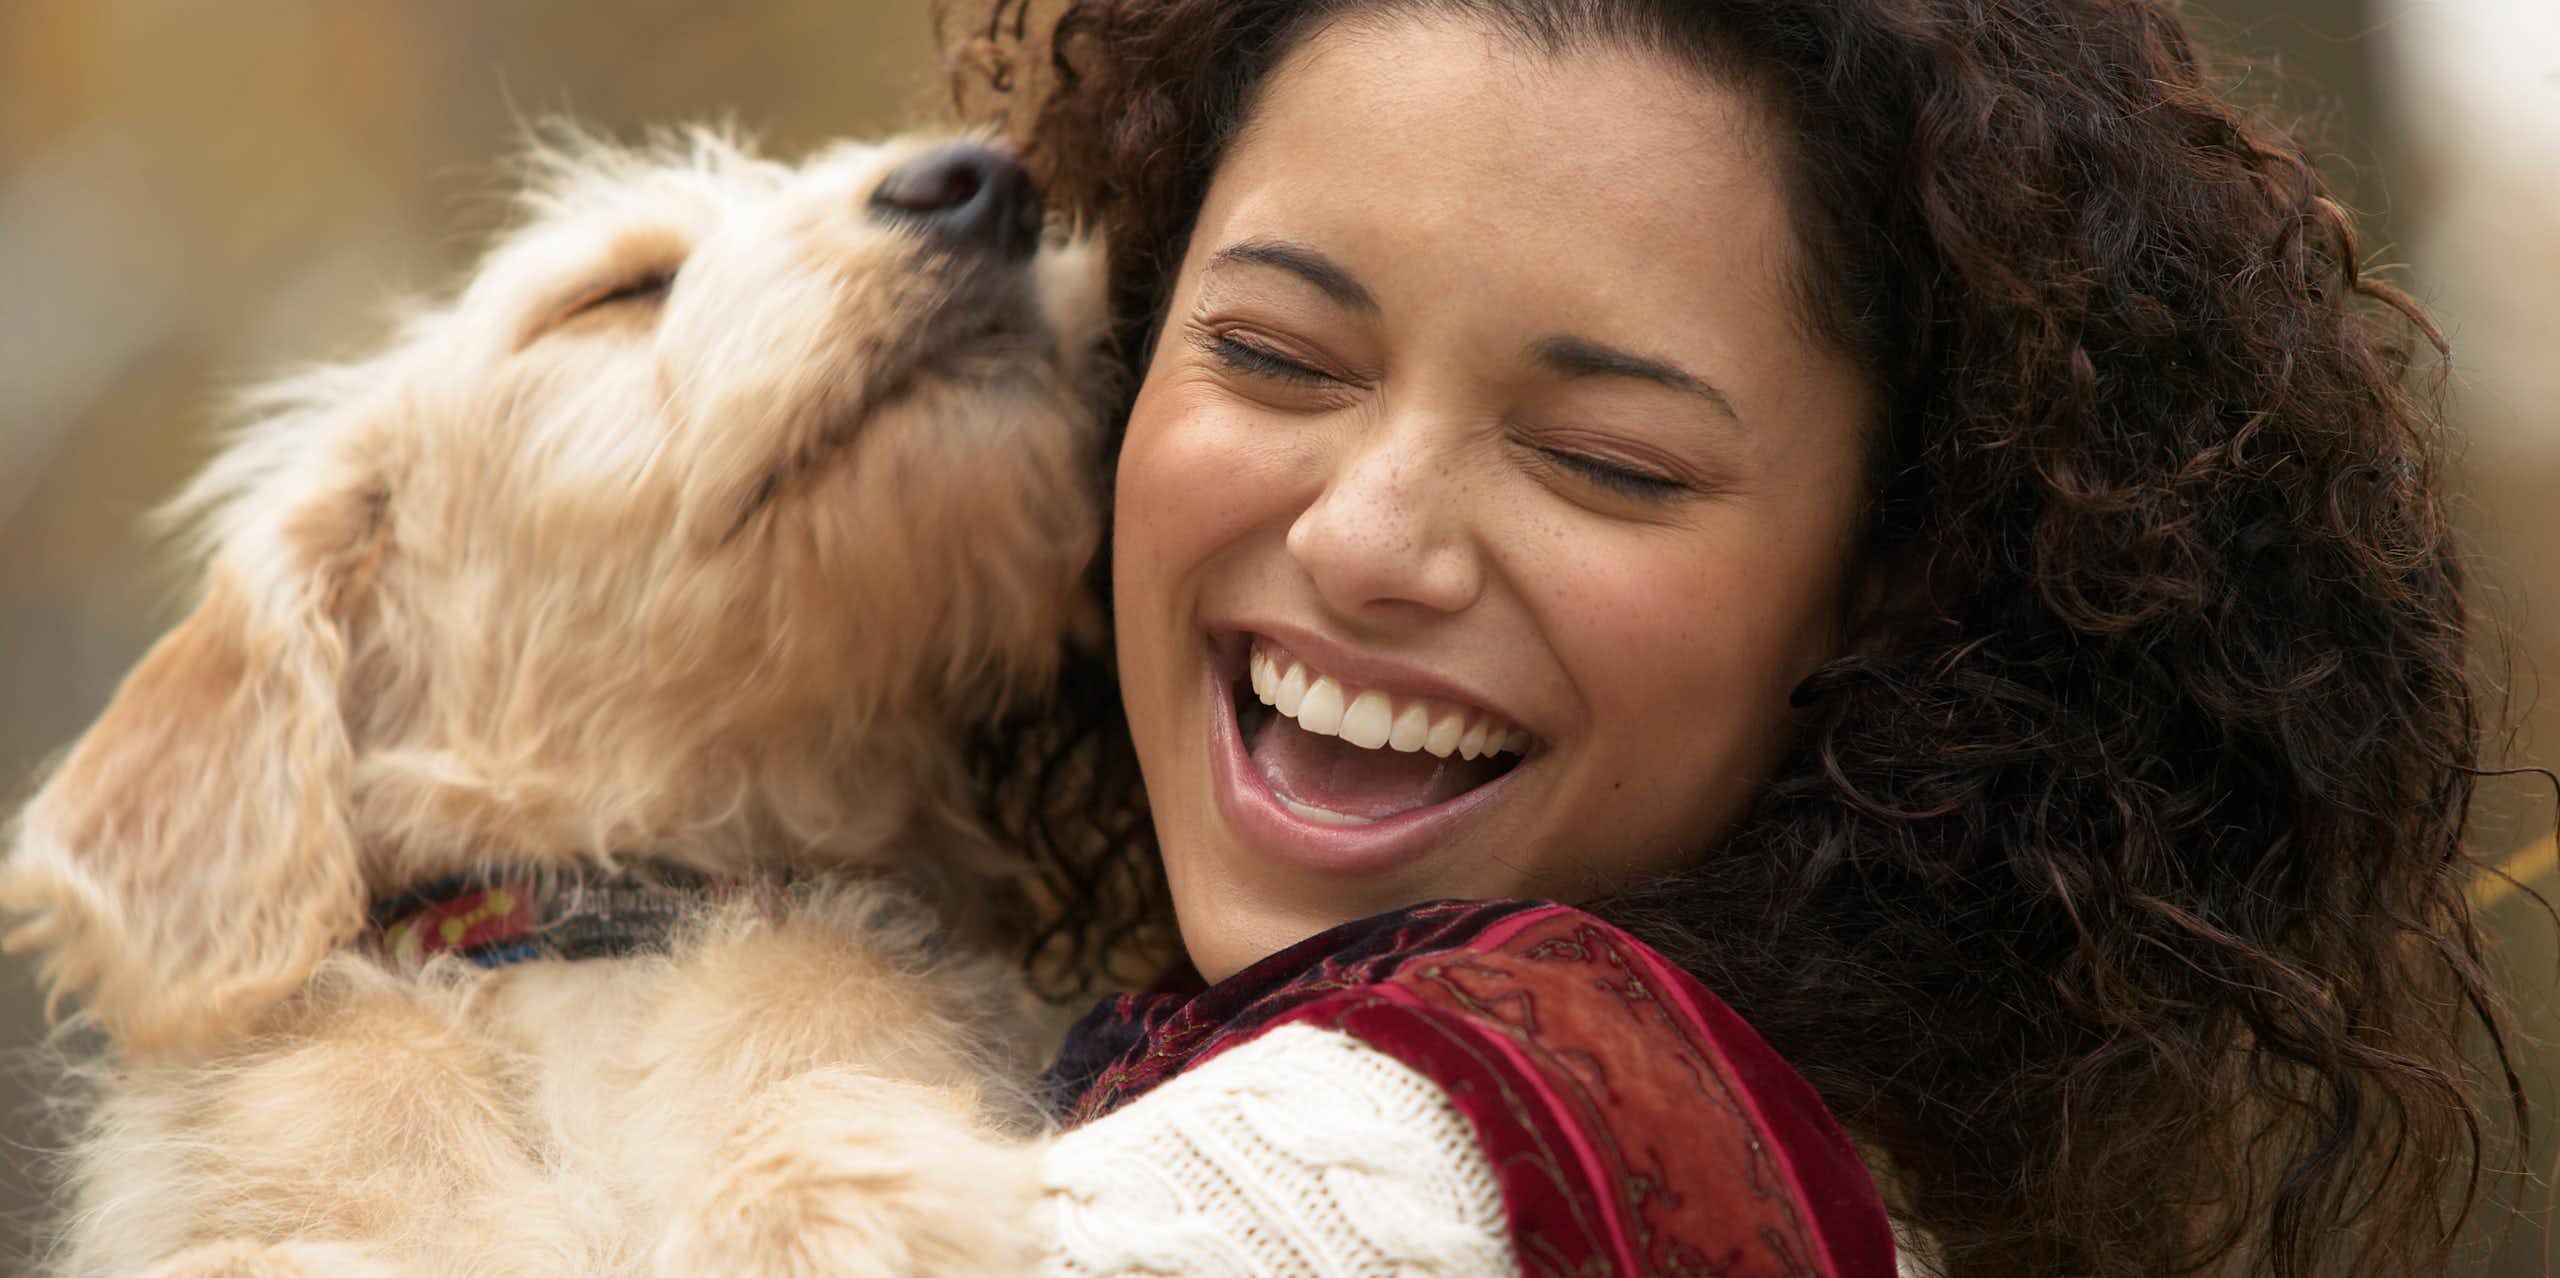 A young woman laughs while holding her dog near to her face.